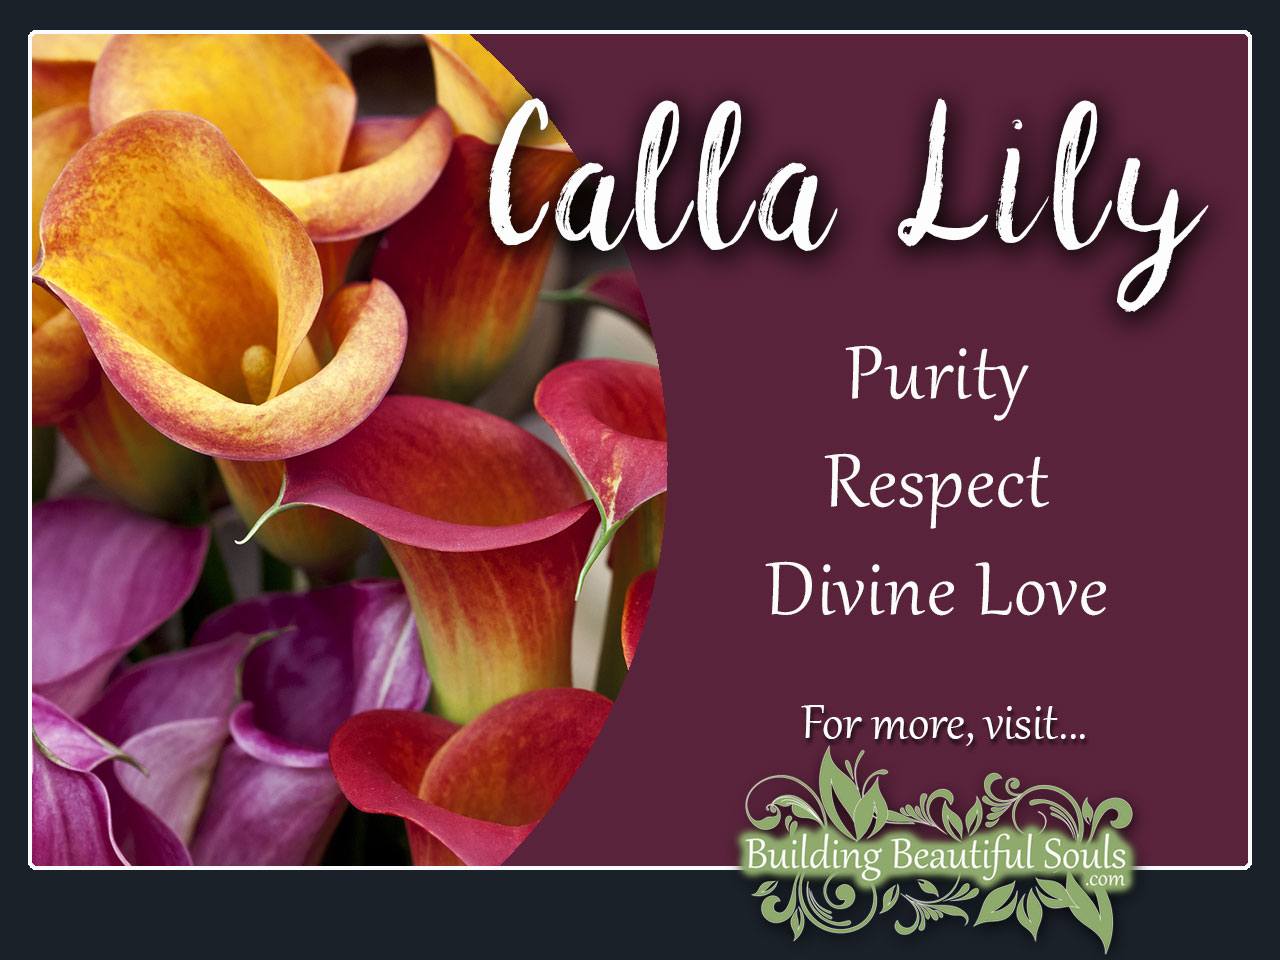 calla lily meaning & symbolism | flower meanings